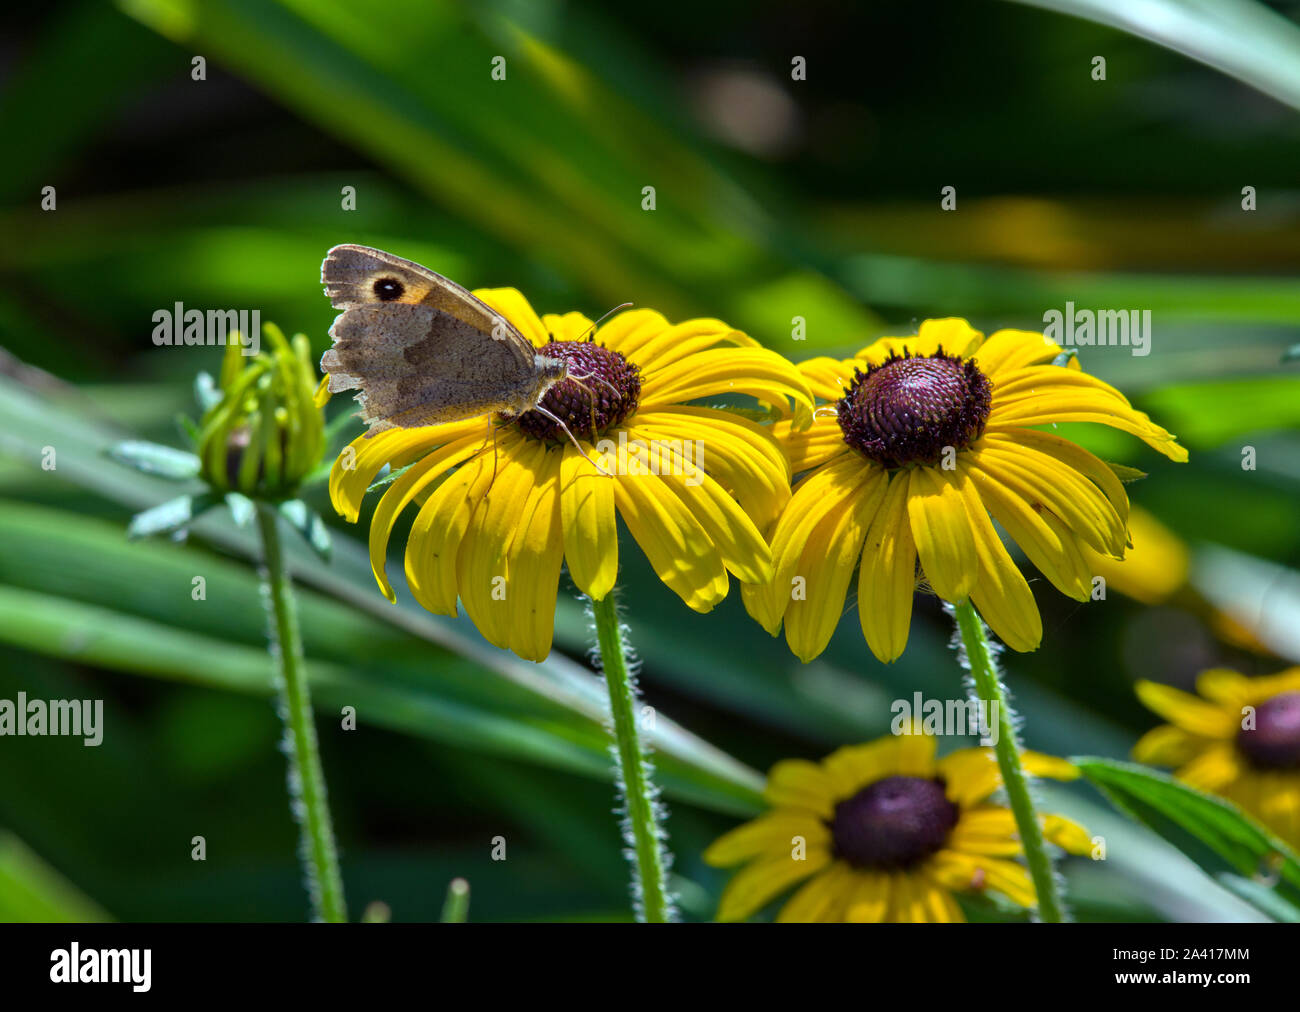 Meadow Brown butterfly on a Rudbeckia flower Stock Photo